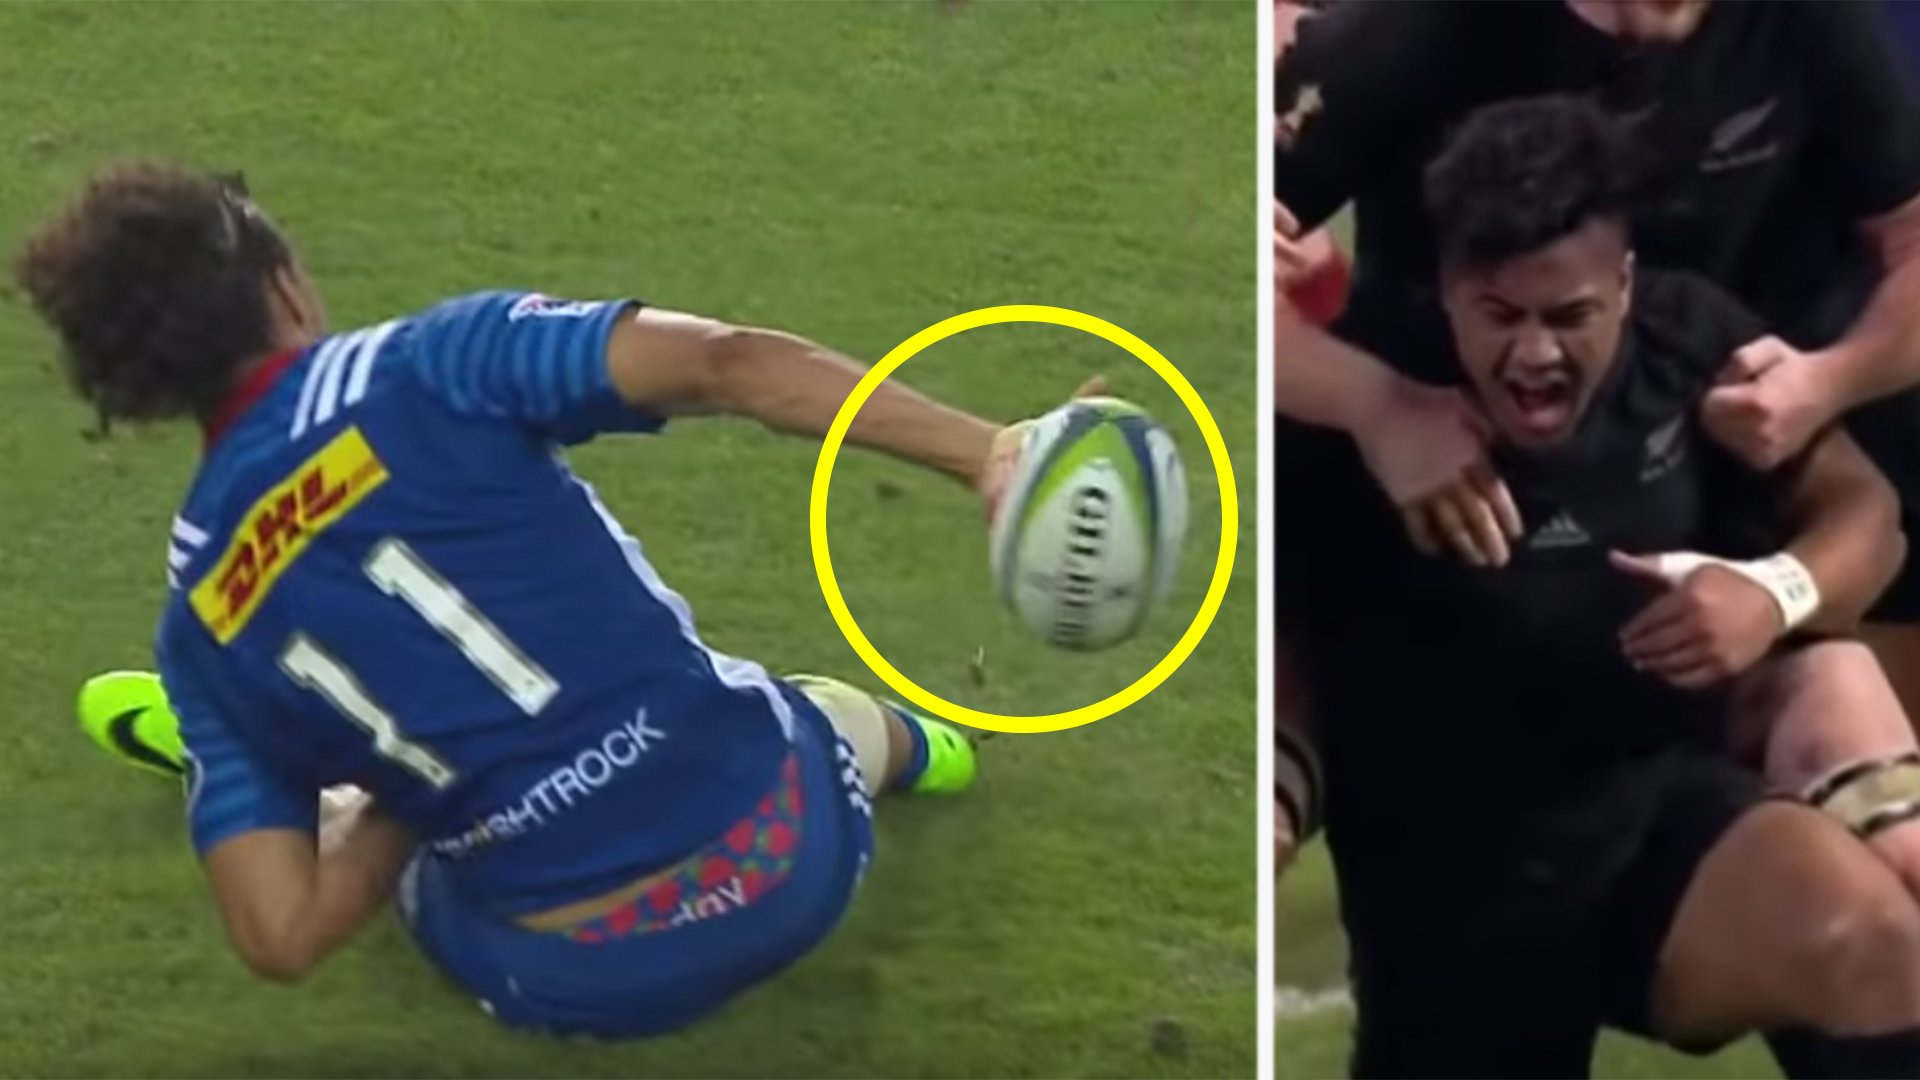 A "tries of the decade" in rugby video has been released and it's filth